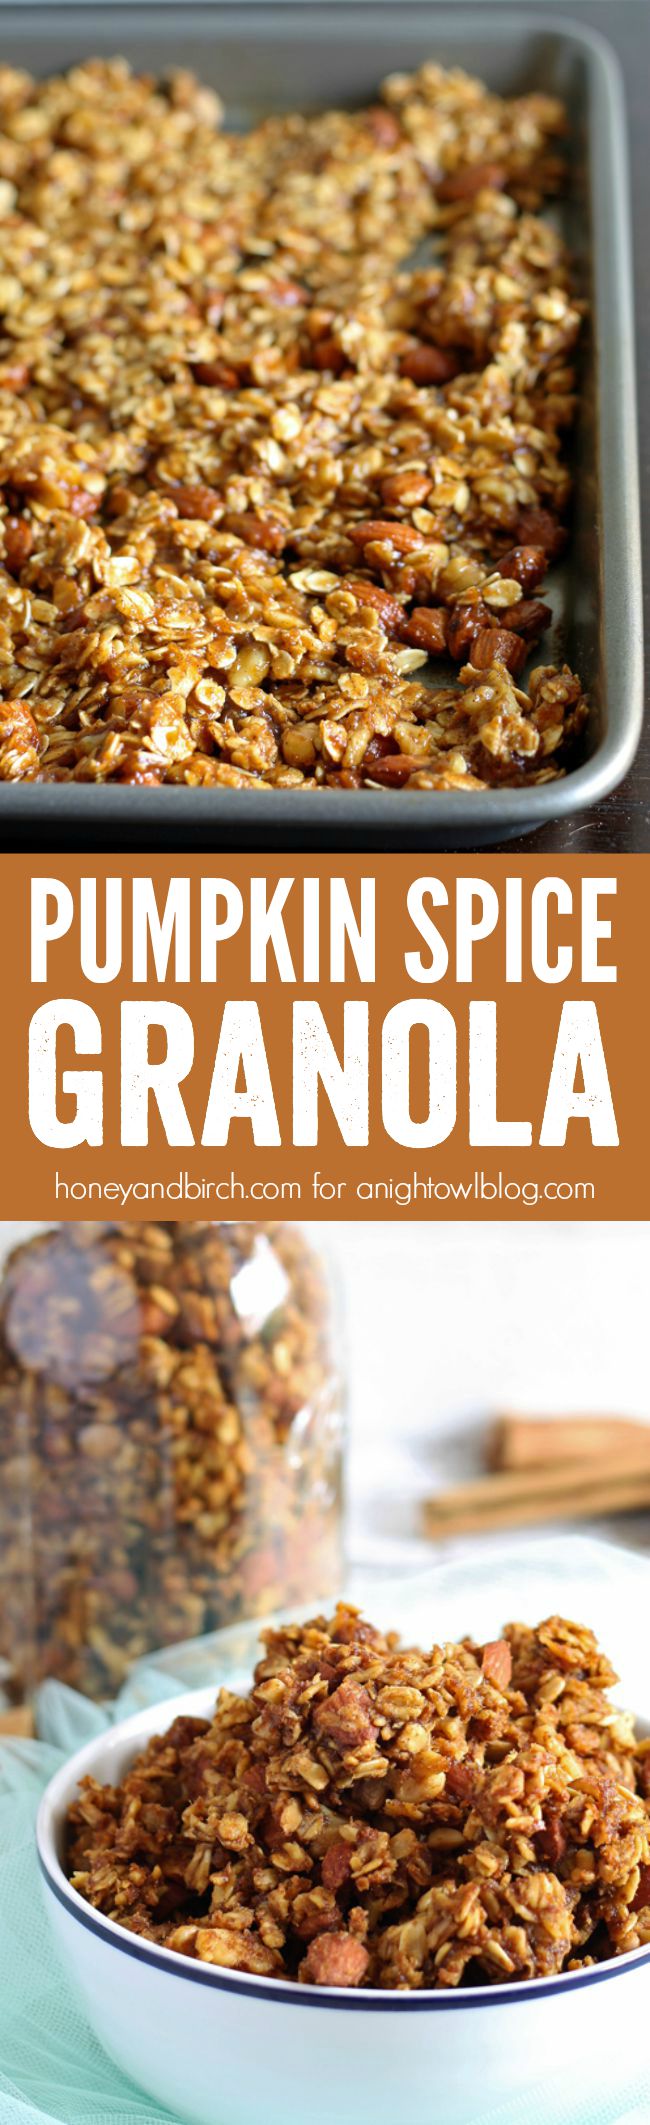 Pumpkin Spice Granola - a sweet combination of your favorite fall spices along with sweet maple syrup, brown sugar, walnuts and almonds.